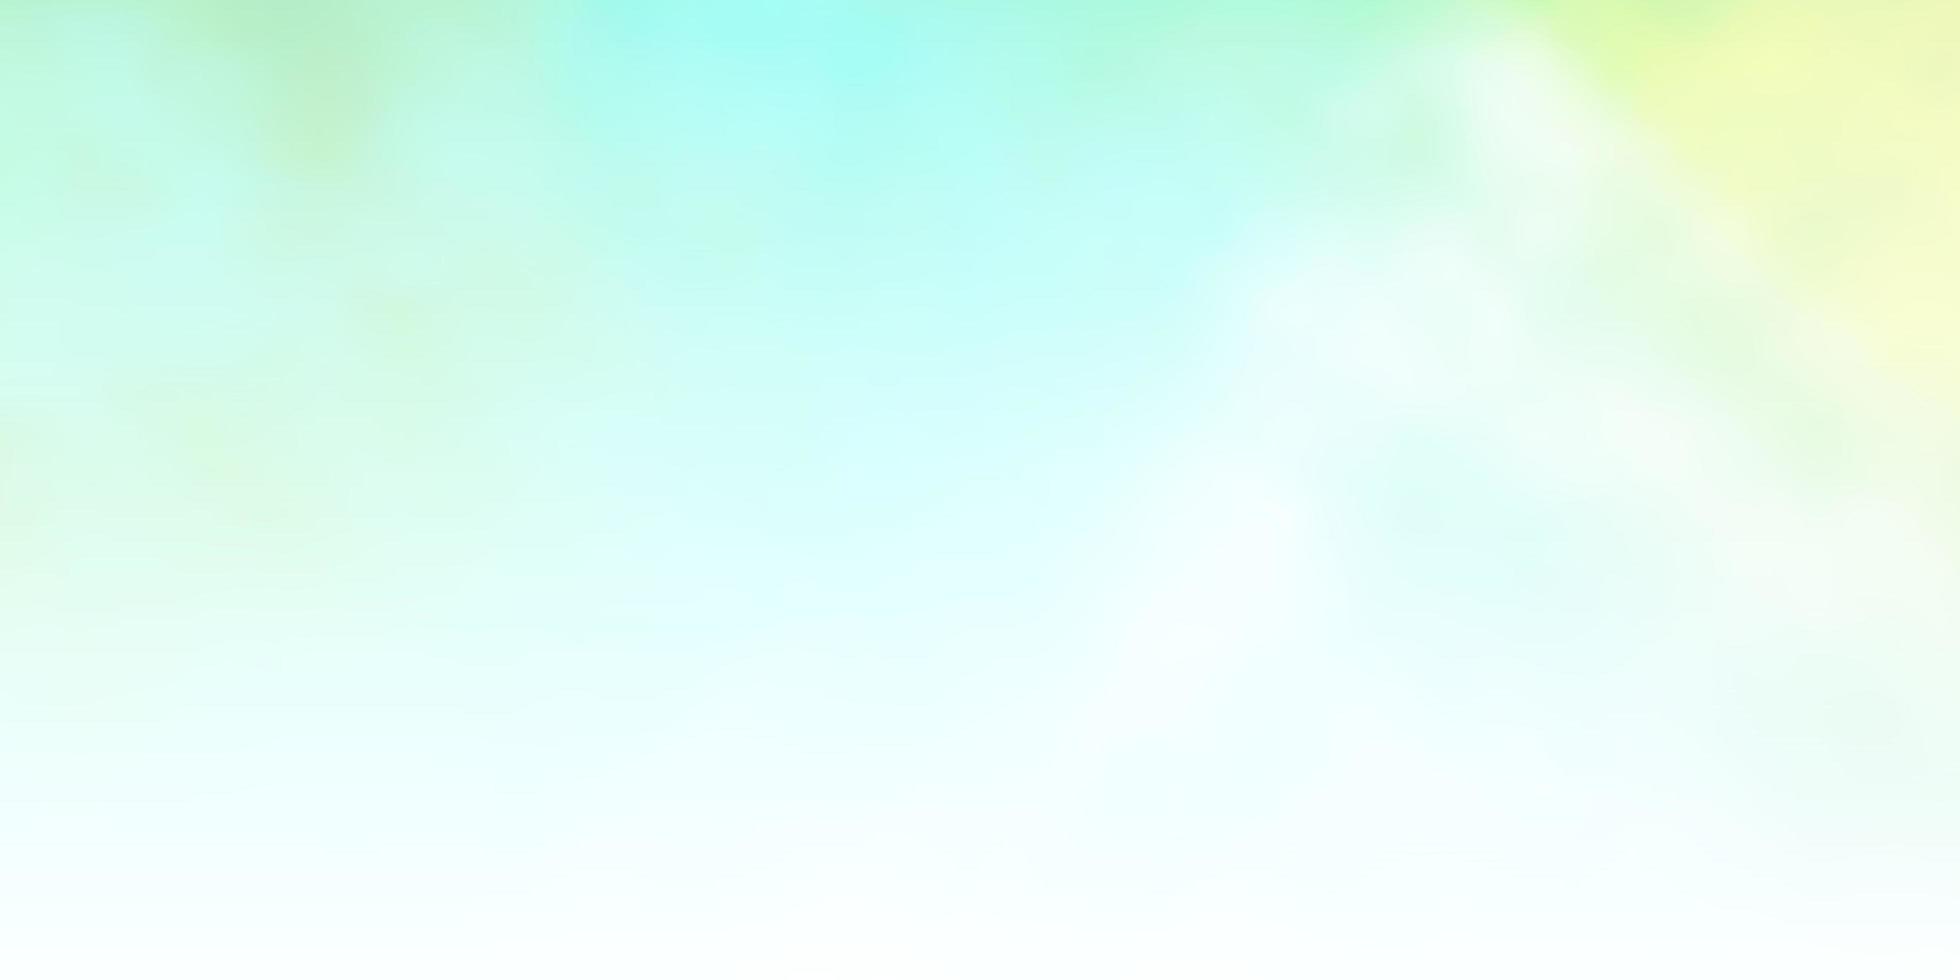 Light Blue, Green vector background with clouds.